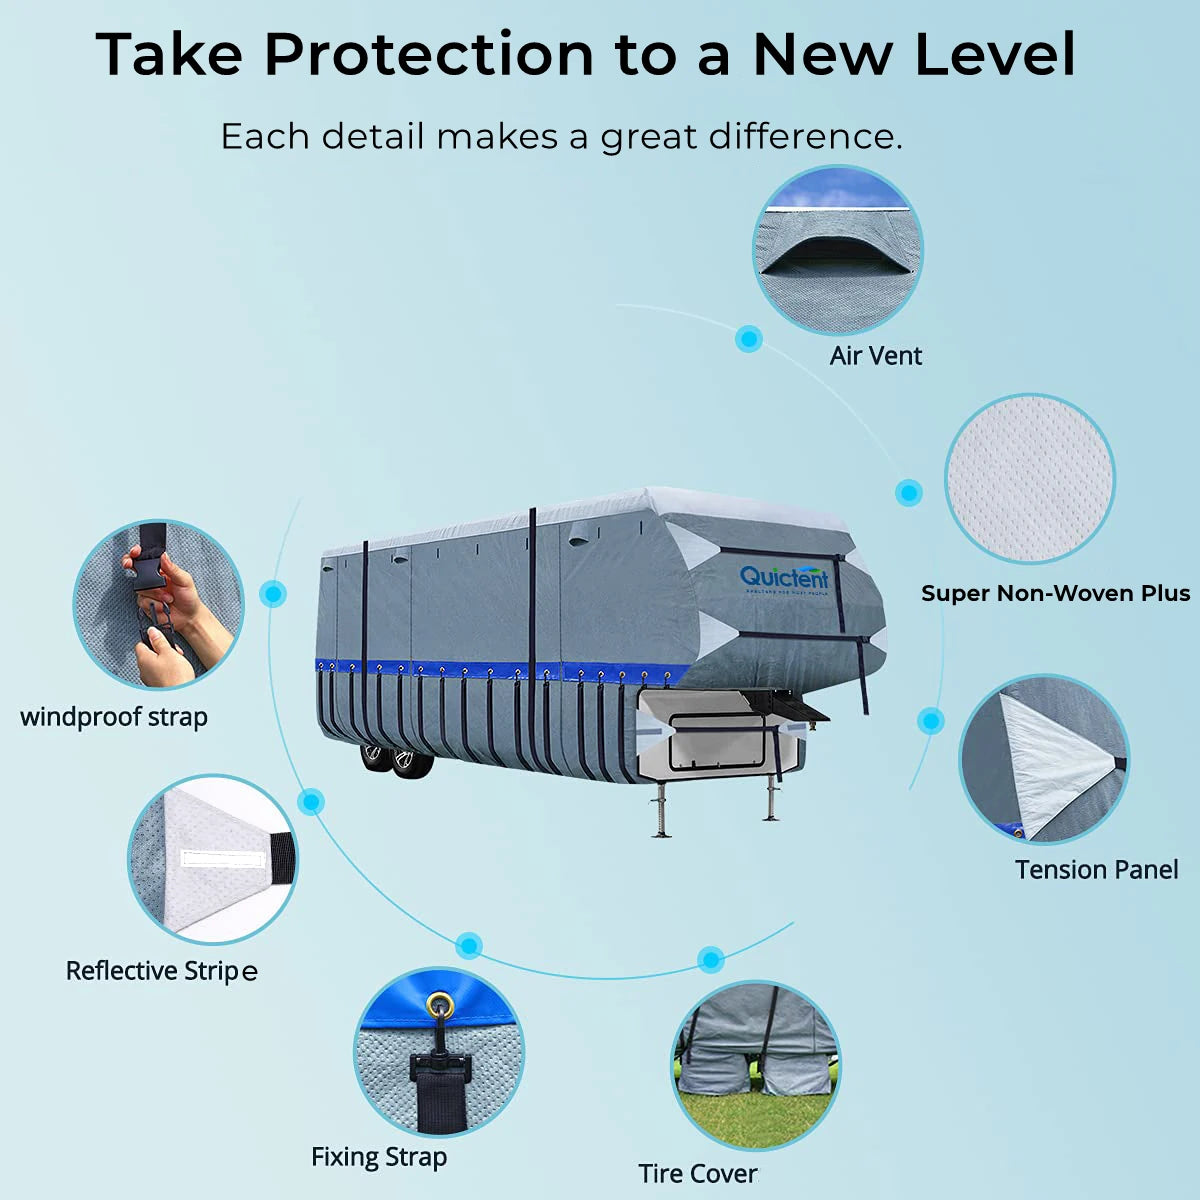 Take Protection to a New Level